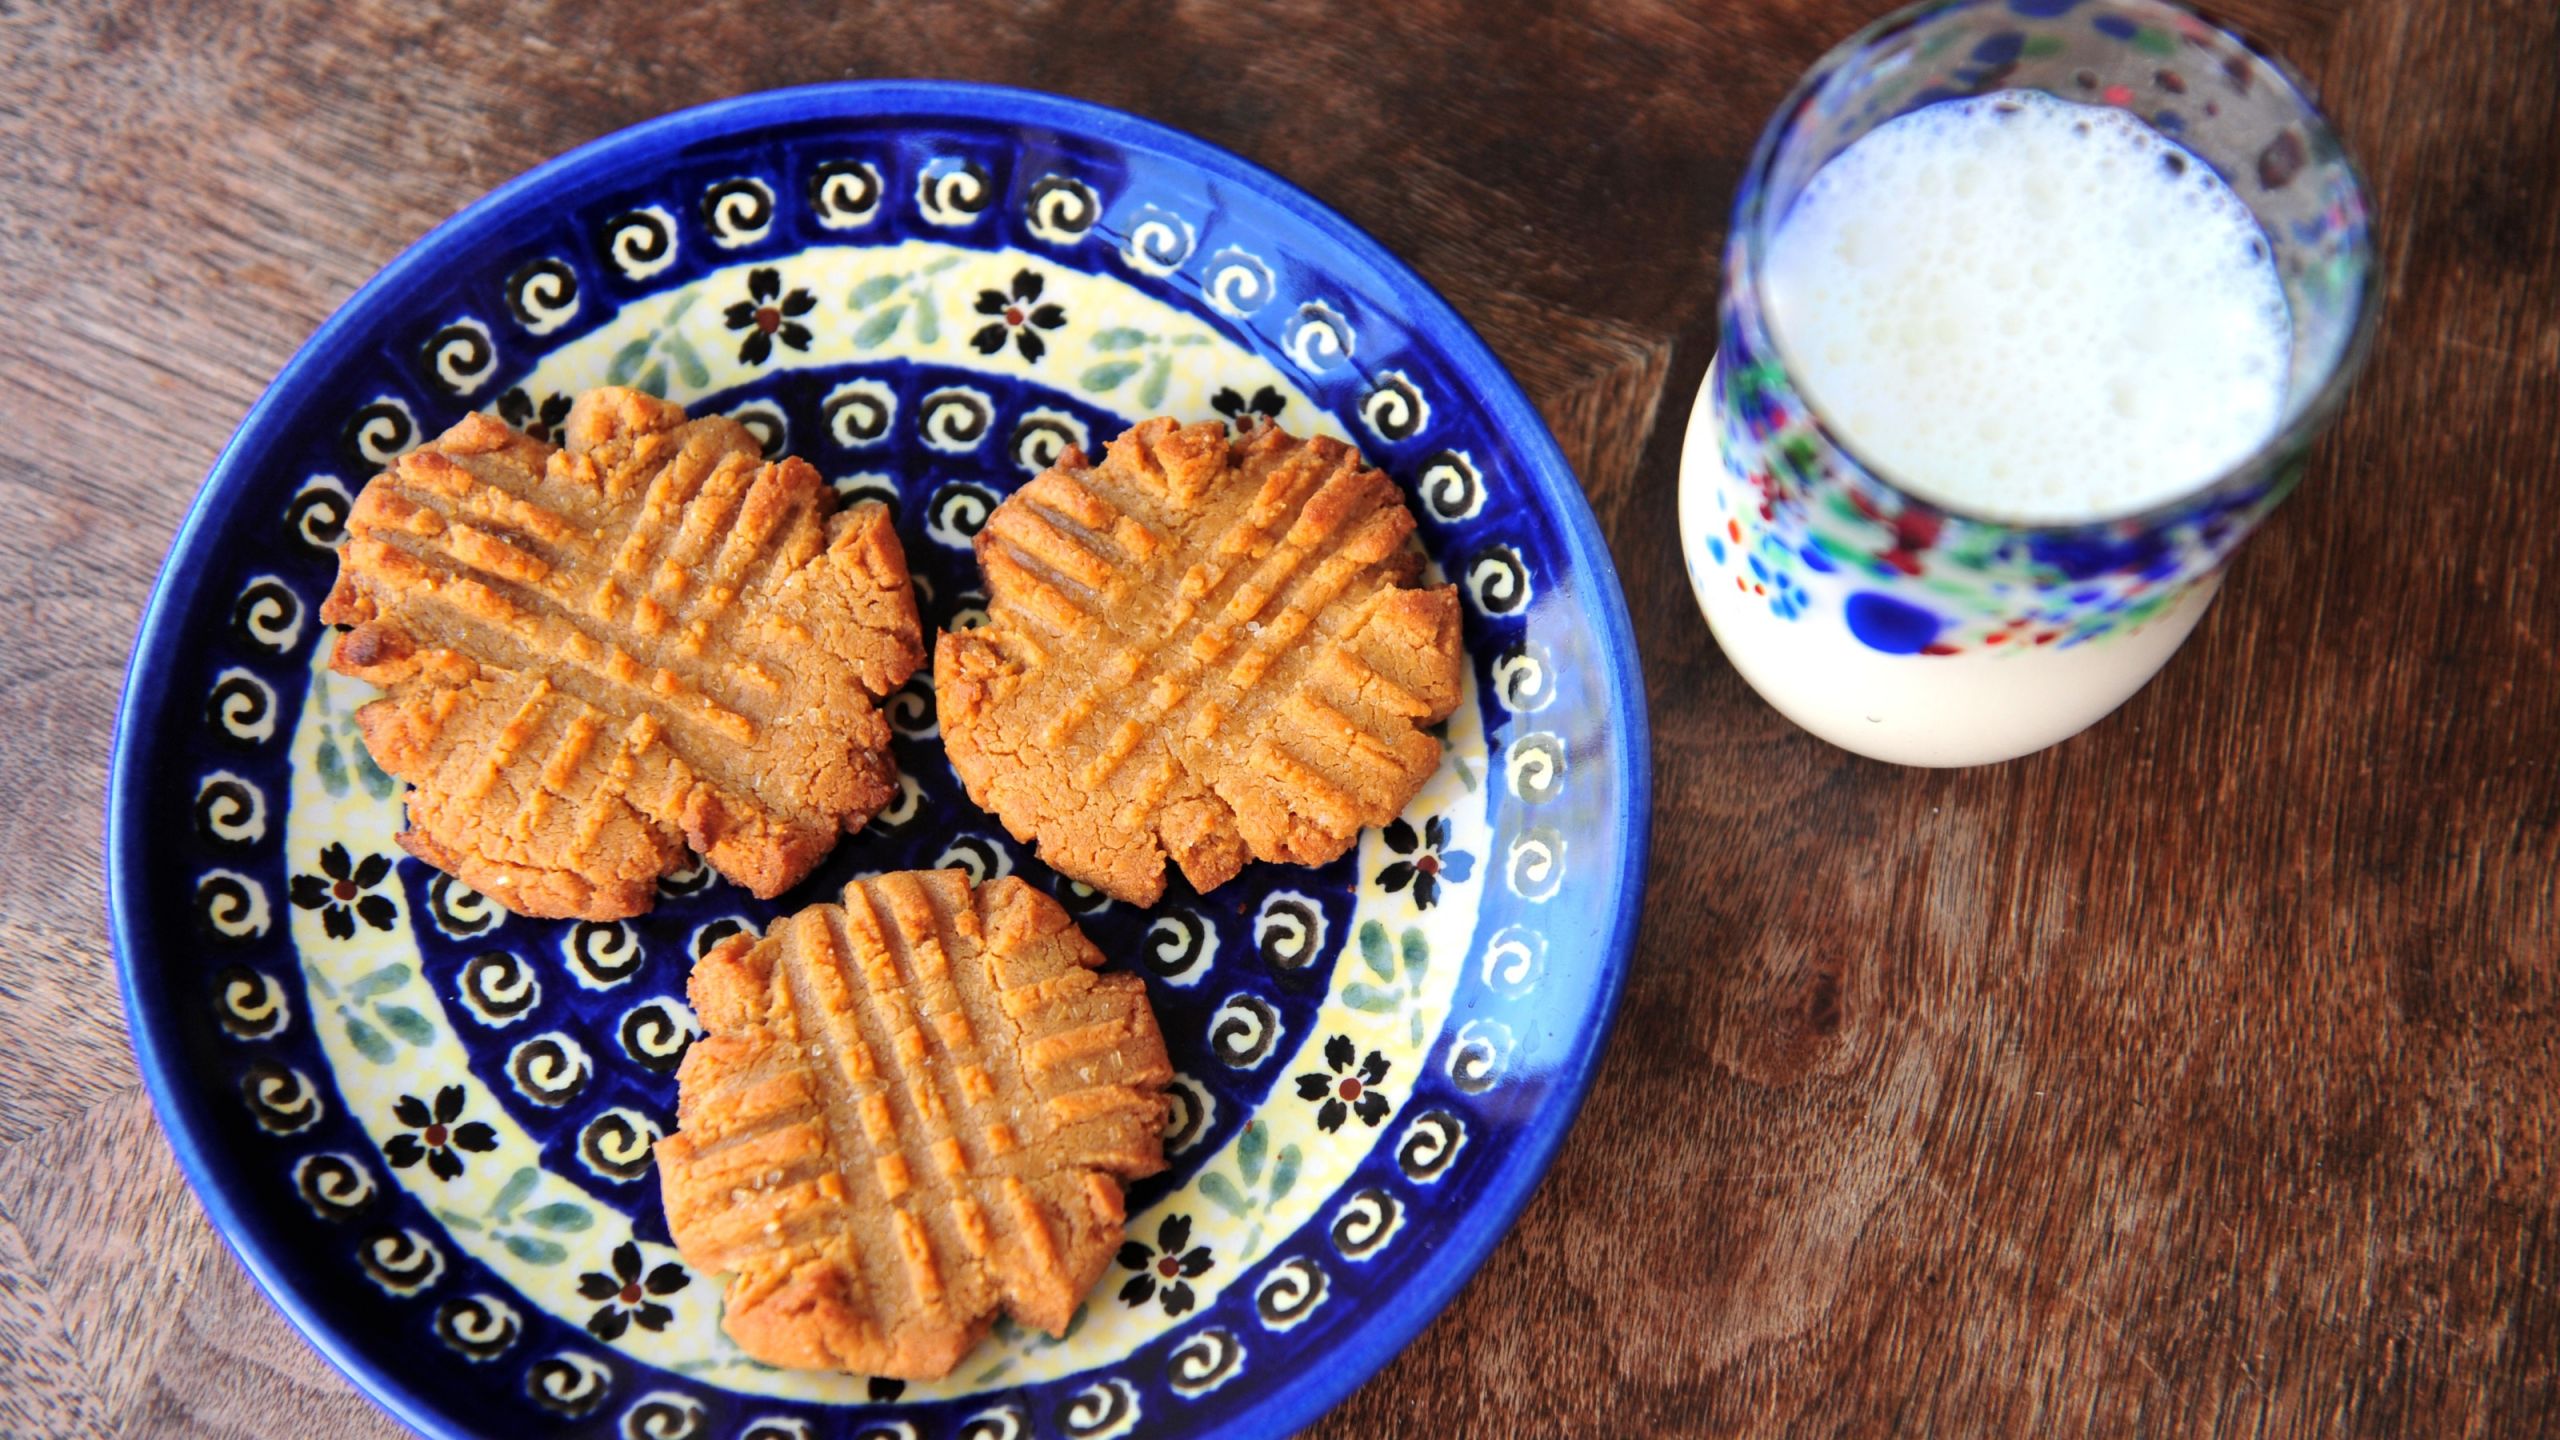 Easy Soft Peanut Butter Cookies
 How to Make Quick and Easy Peanut Butter Cookies 9 Steps